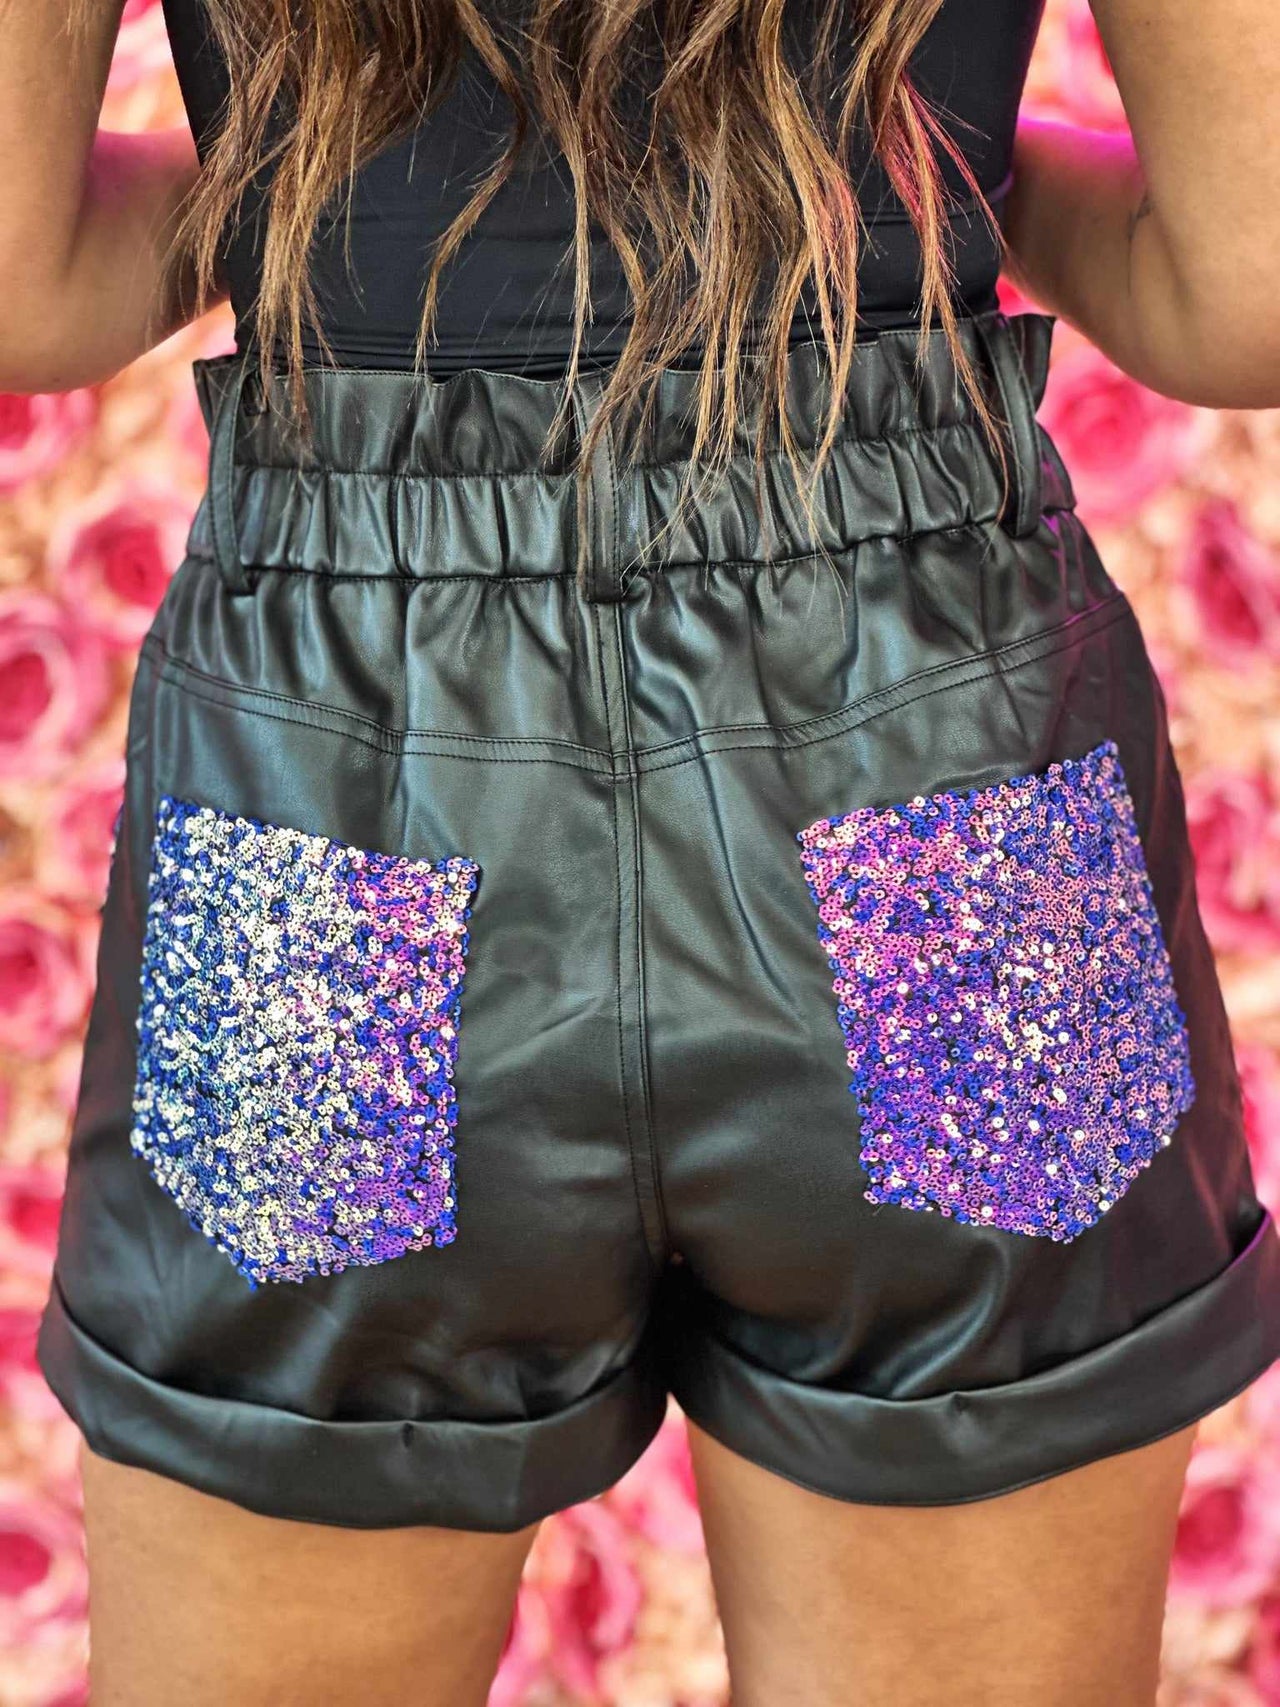 Black faux leather shorts with purple sequins